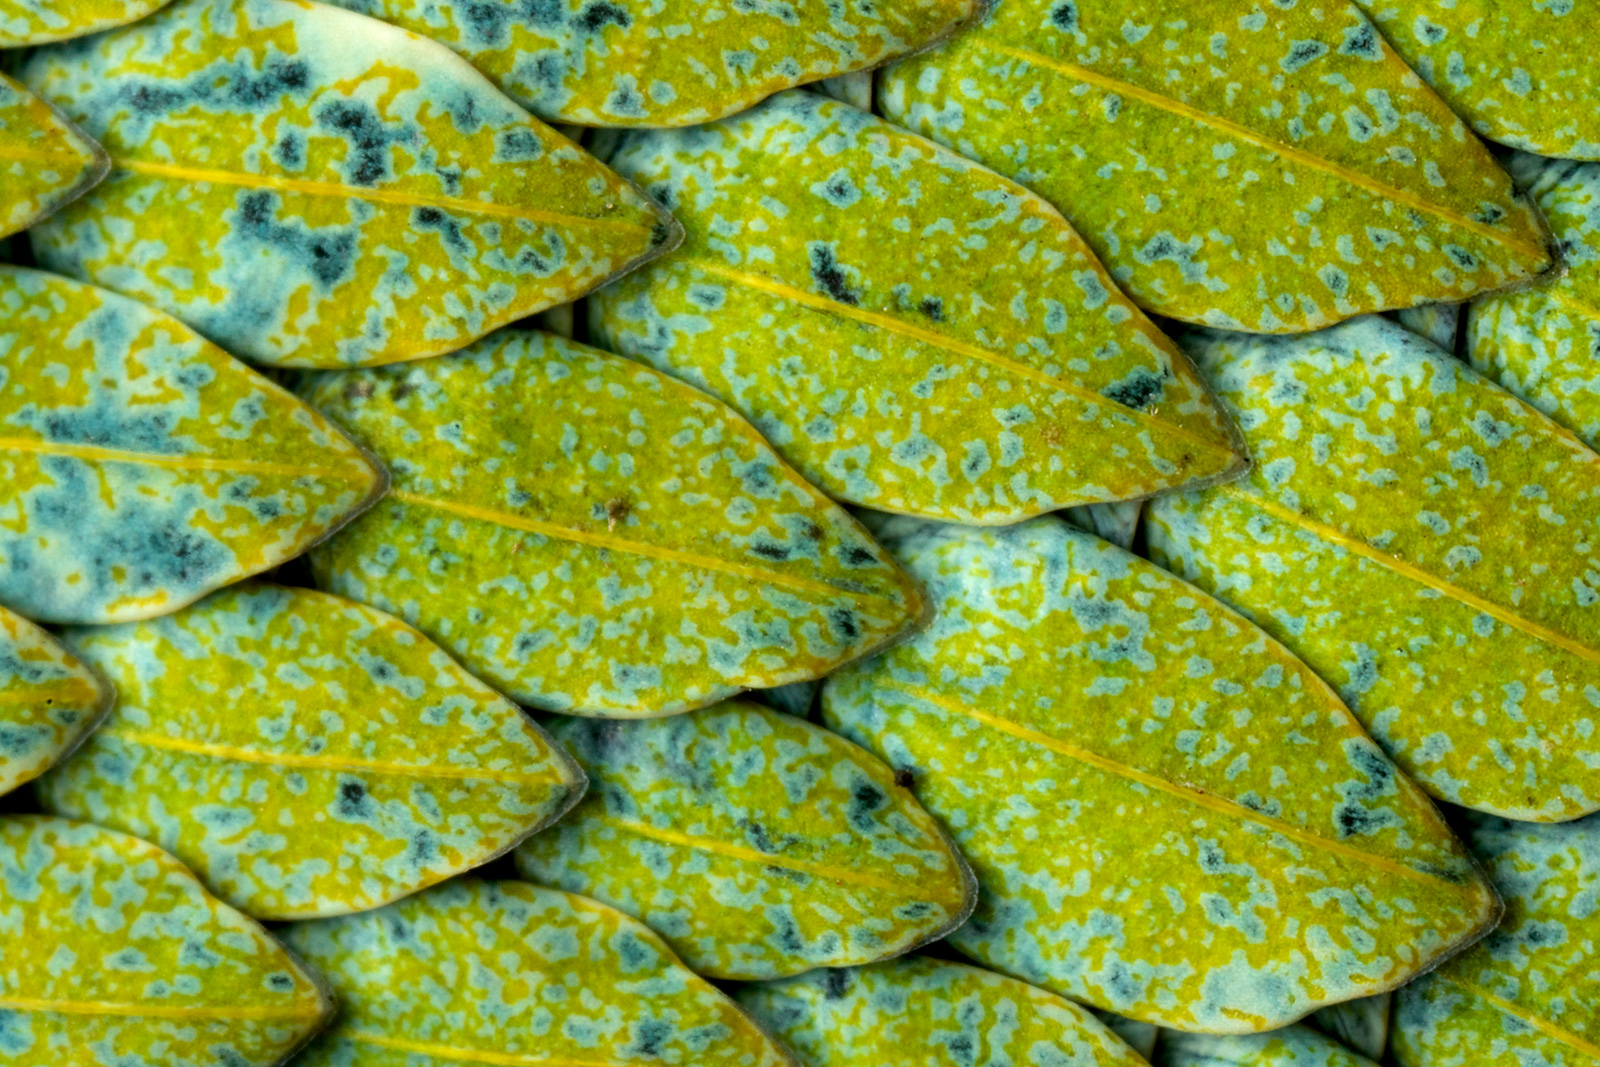 Extreme macro photo of the scales of an Eyelash Palm-Pitviper (Bothriechis schlegelii), created using the Canon MP-E 65mm Macro Lens